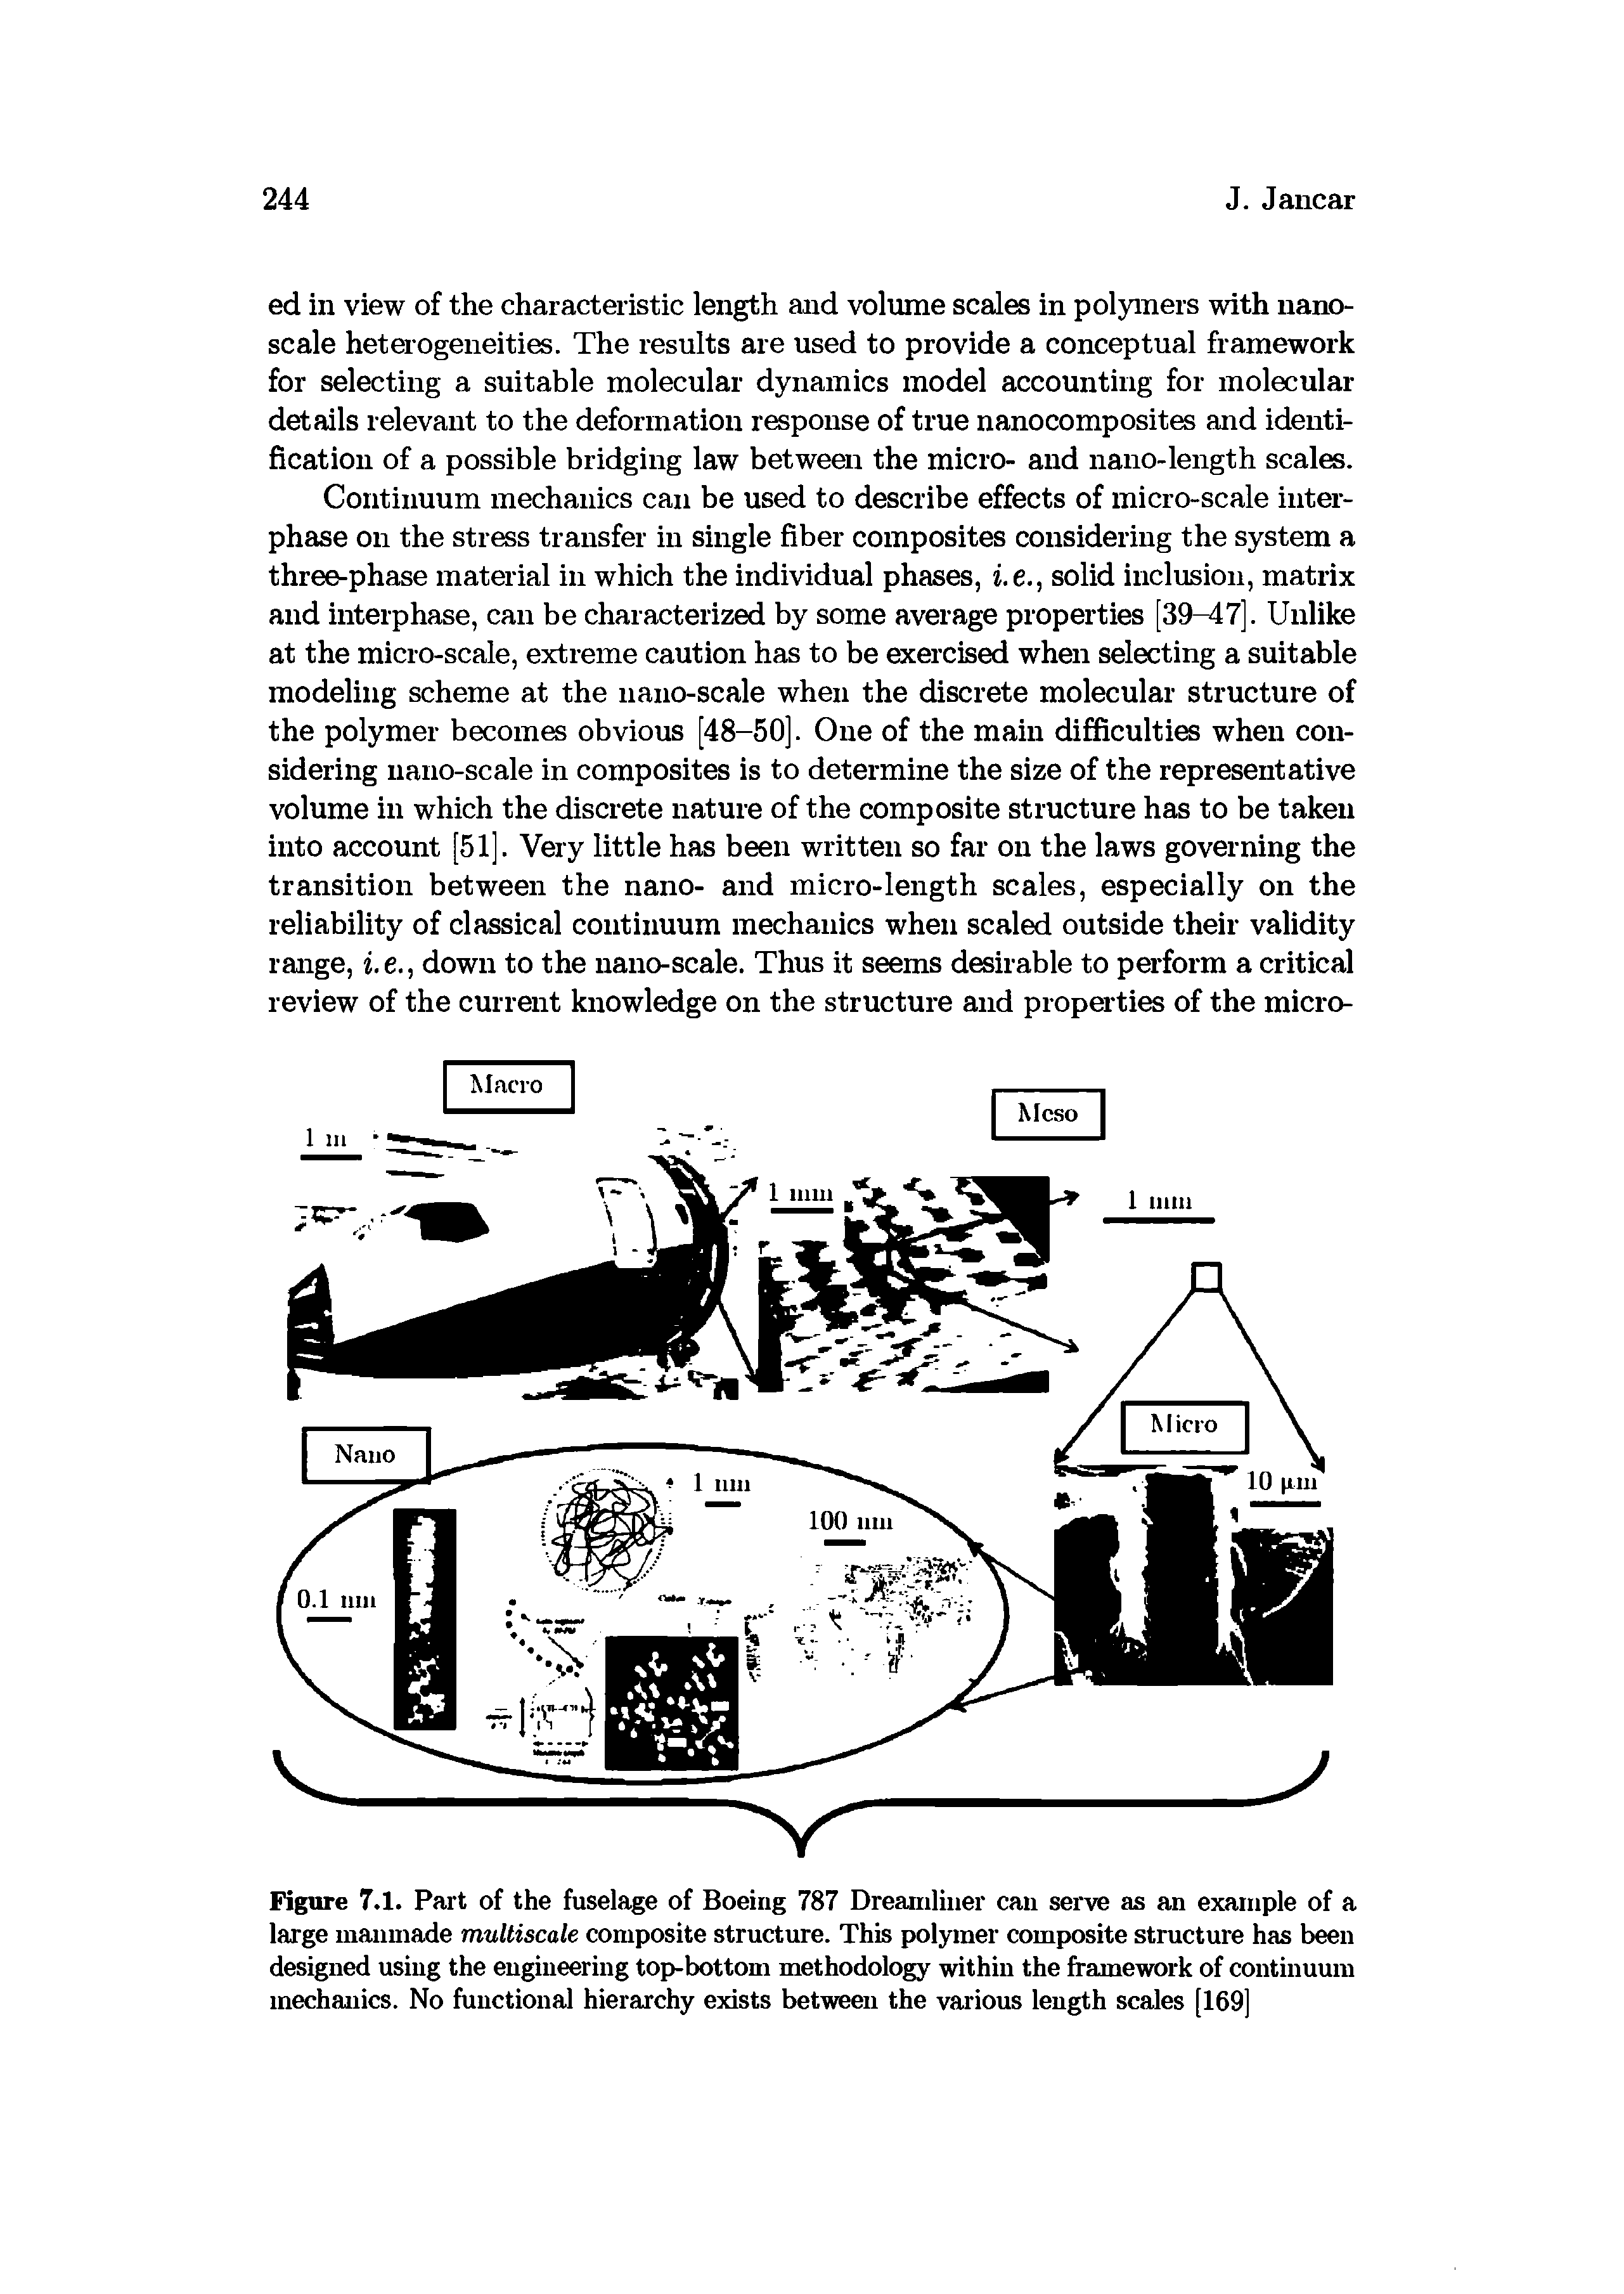 Figure 7.1. Part of the fuselage of Boeing 787 Dreamliner can serve as an example of a large manmade multiscale composite structure. This polymer composite structure has been designed using the engineering top-bottom methodology within the framework of continumn mechanics. No functional hierarchy exists between the various length scales [169]...